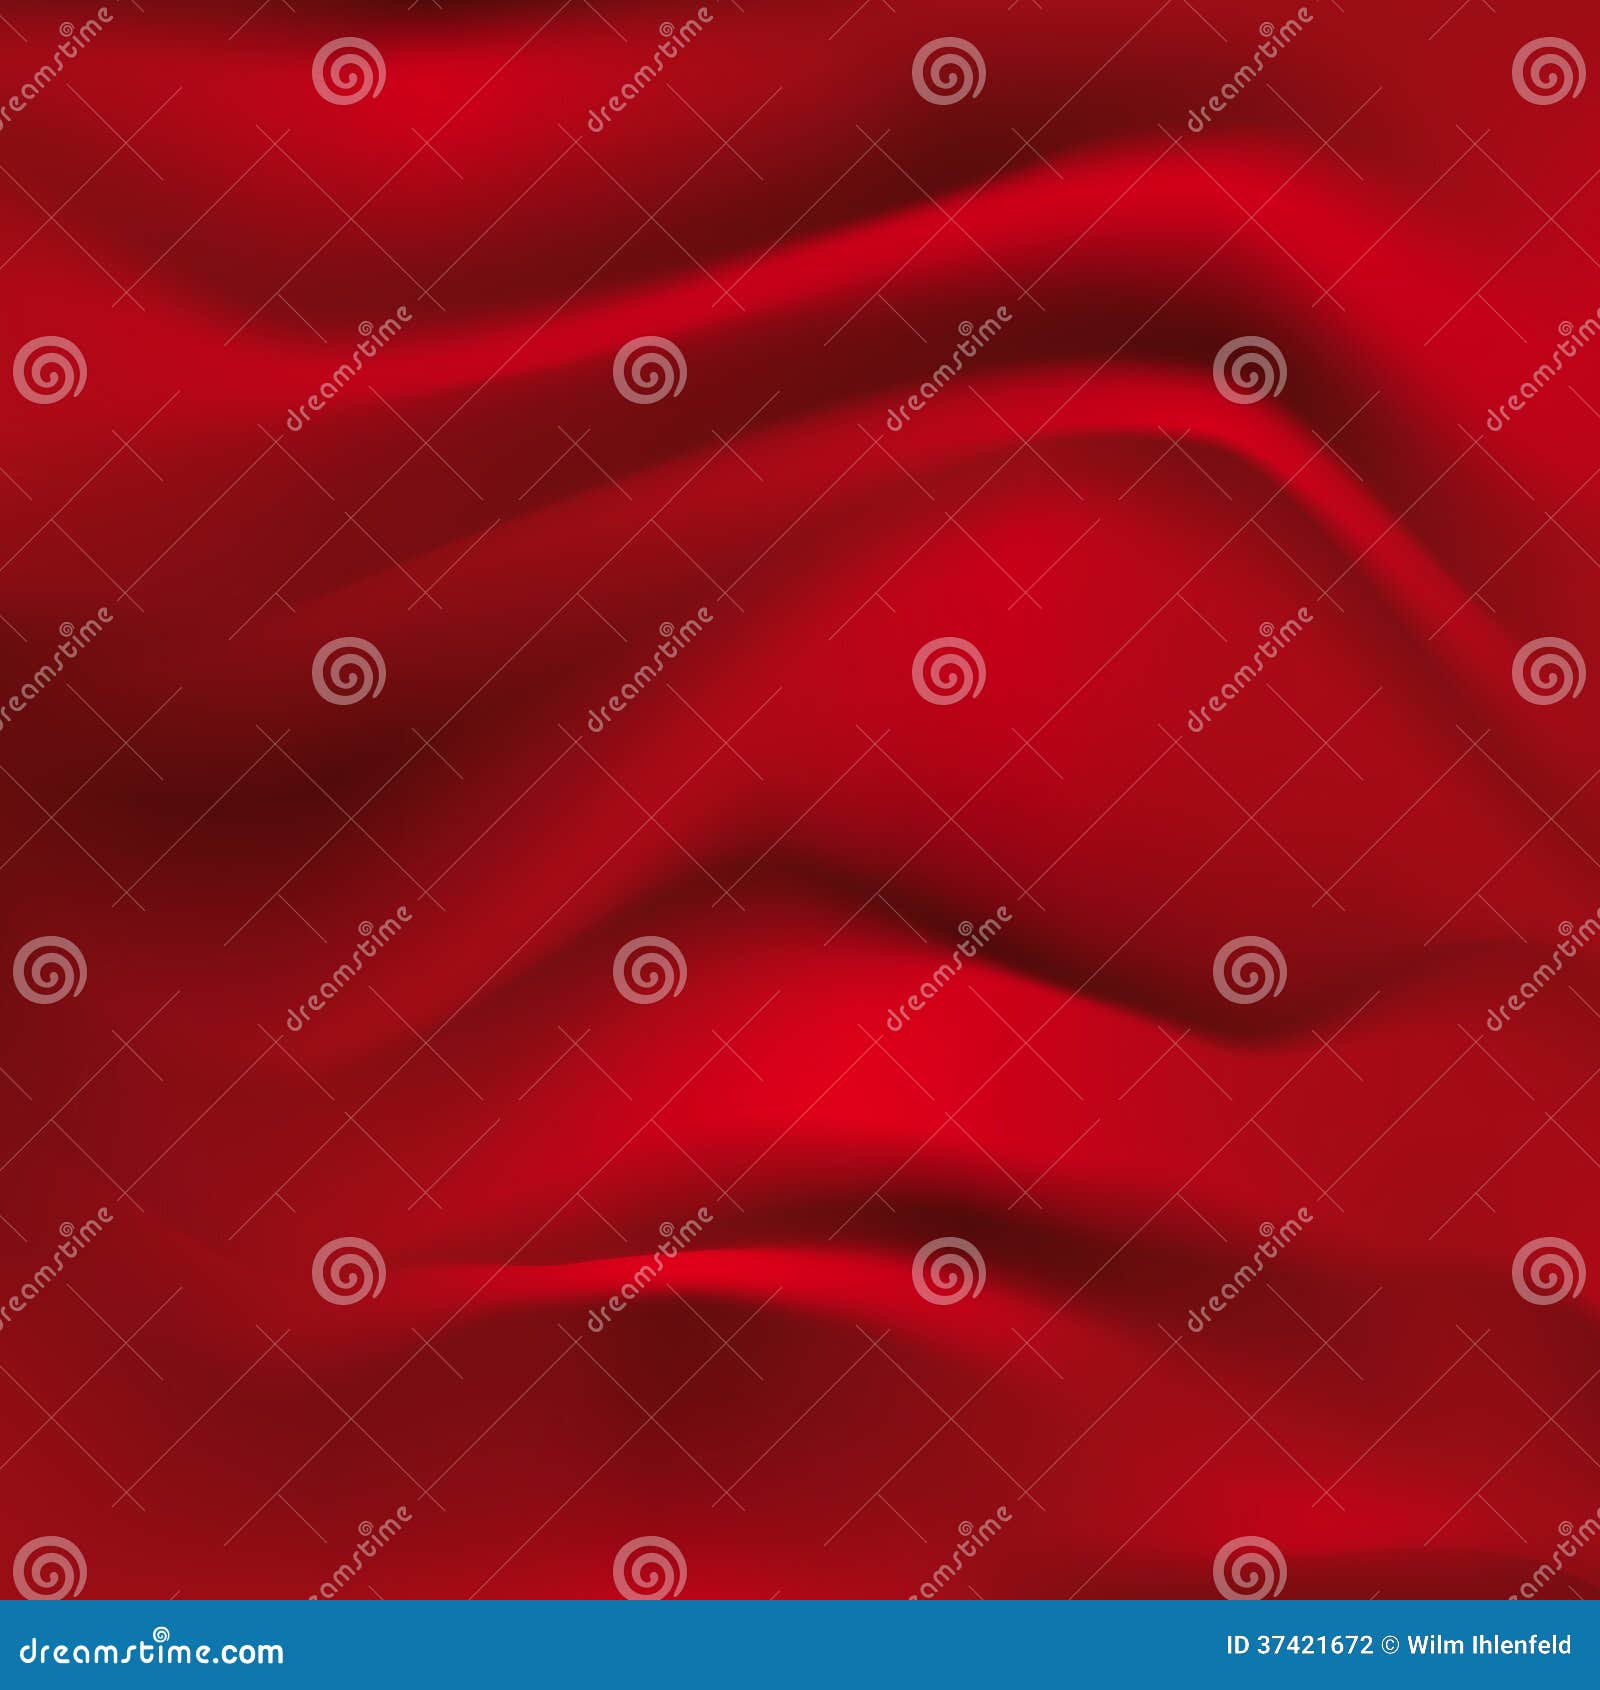 Abstract Red Cloth Stock Photo, Picture and Royalty Free Image. Image  62859469.